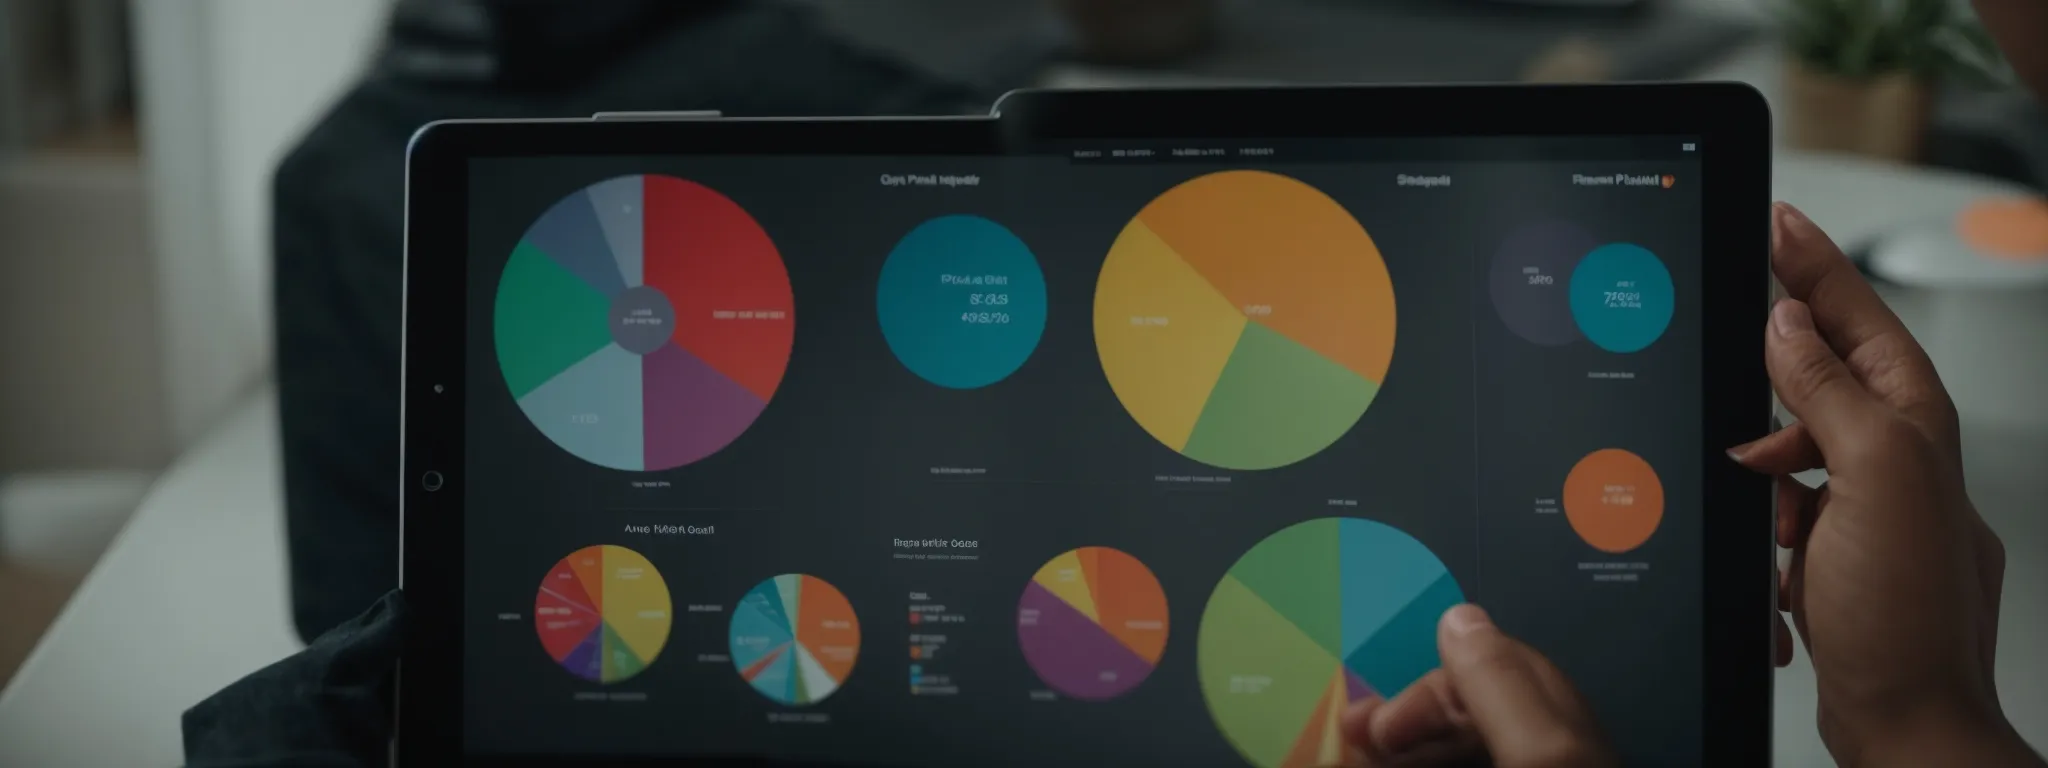 a small business owner analyzing a colorful pie chart on a tablet screen to strategize marketing efforts.